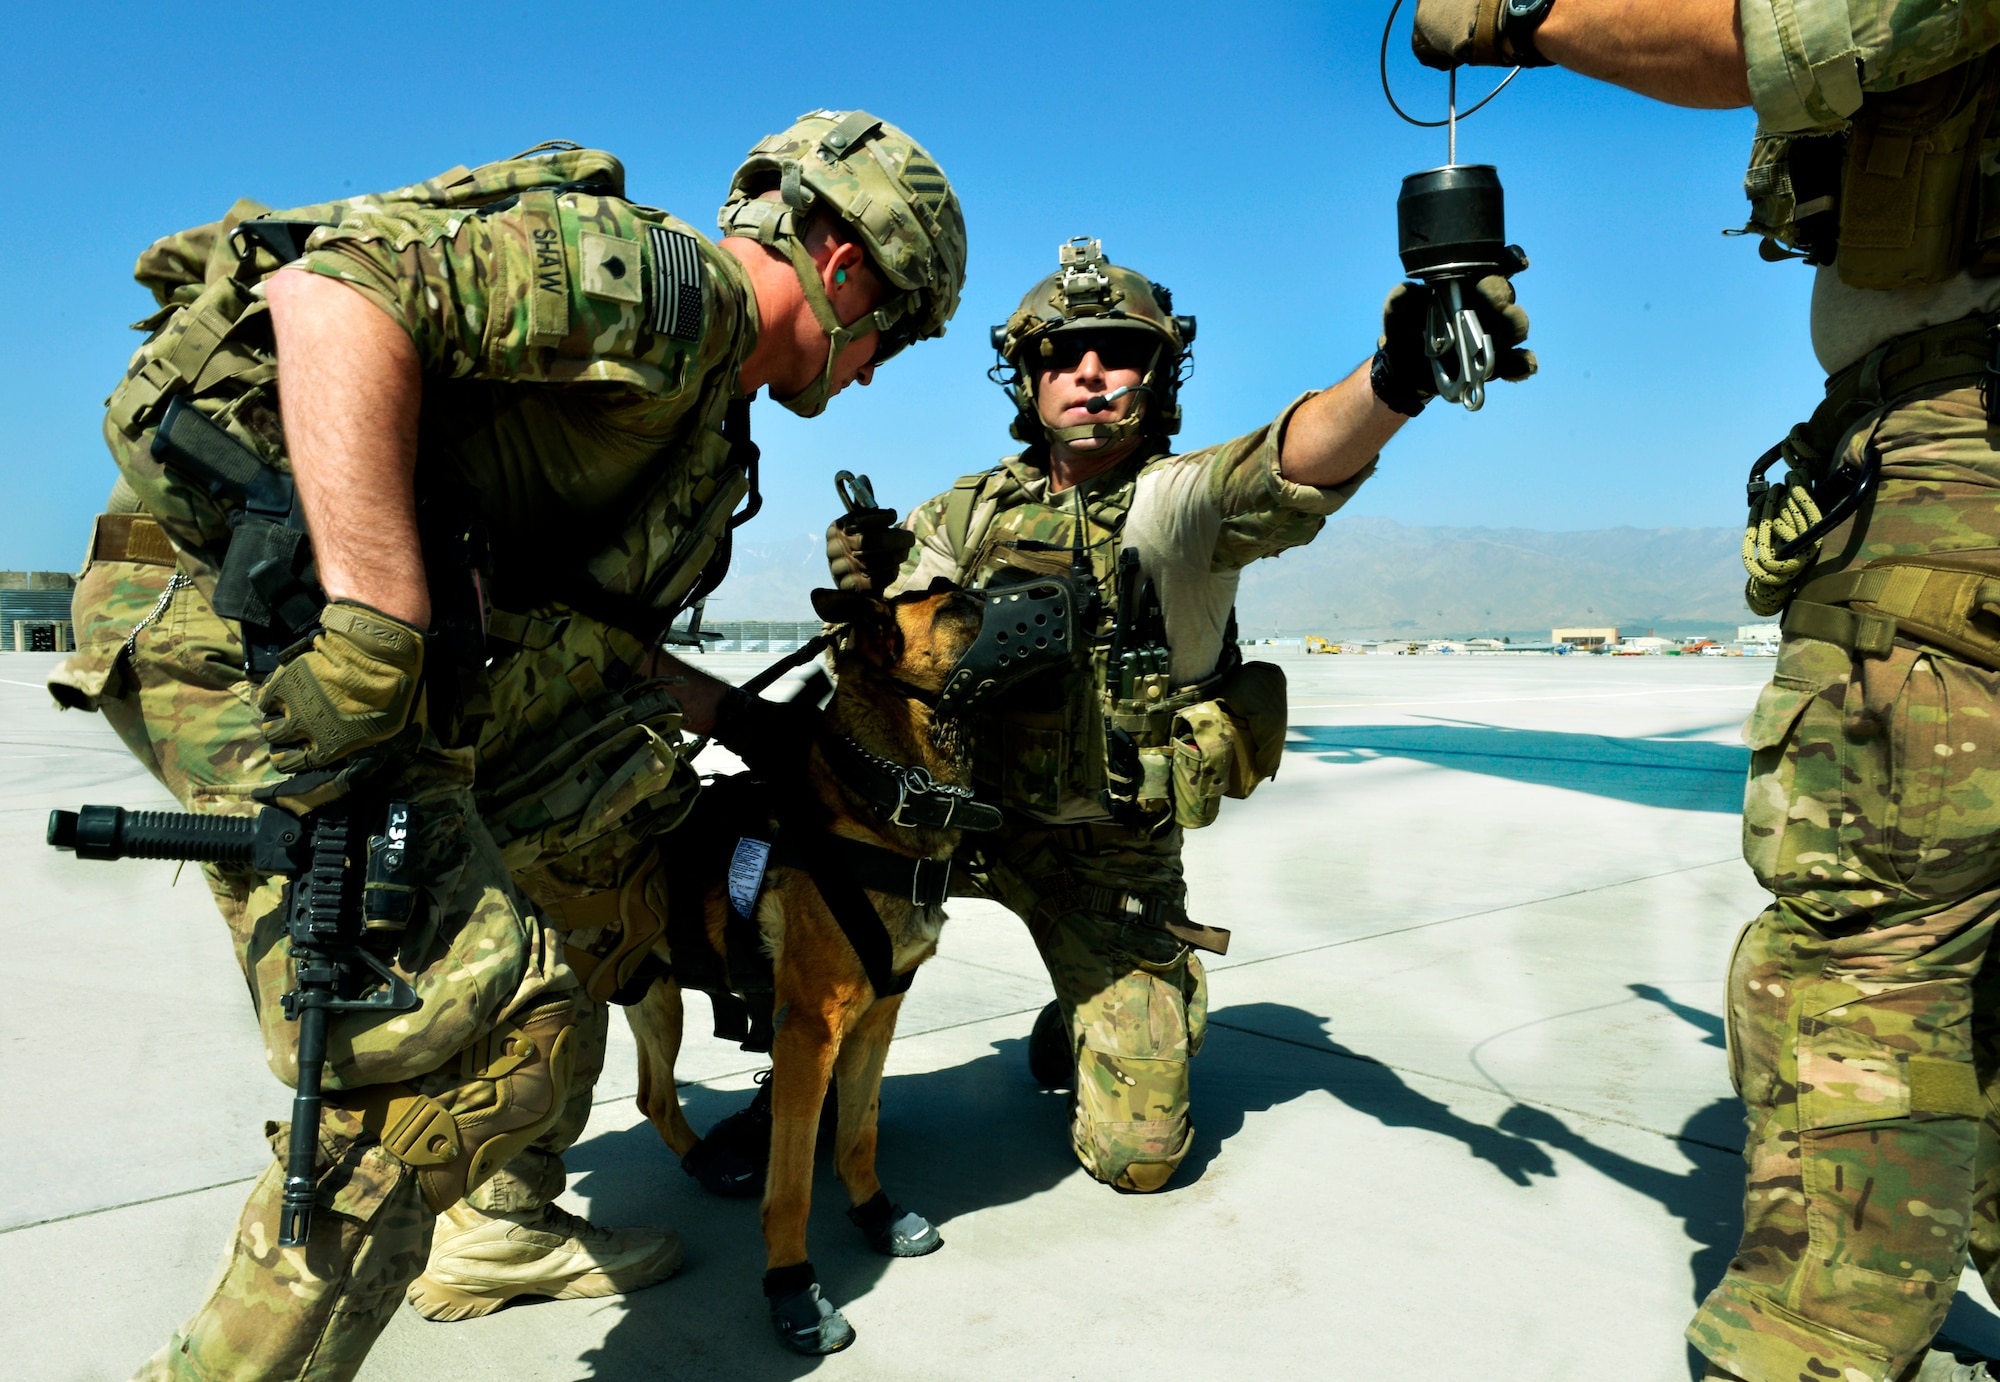 Senior Airman Jason Fischman, 83rd Expeditionary Rescue Squadron pararescueman, secures a hoist to an U.S. Army tactical explosive detection dog prior to loading into a HH-60G Pave Hawk helicopter during a training scenario at Bagram Airfield, Afghanistan, June 21.  This is the first time the 83rd RQS has participated in dog rescue training with the U.S. Army here. Fischman is deployed from Royal Air Force Lakenheath, England. (U.S. Air Force photo/ Staff Sgt. Stephenie Wade)